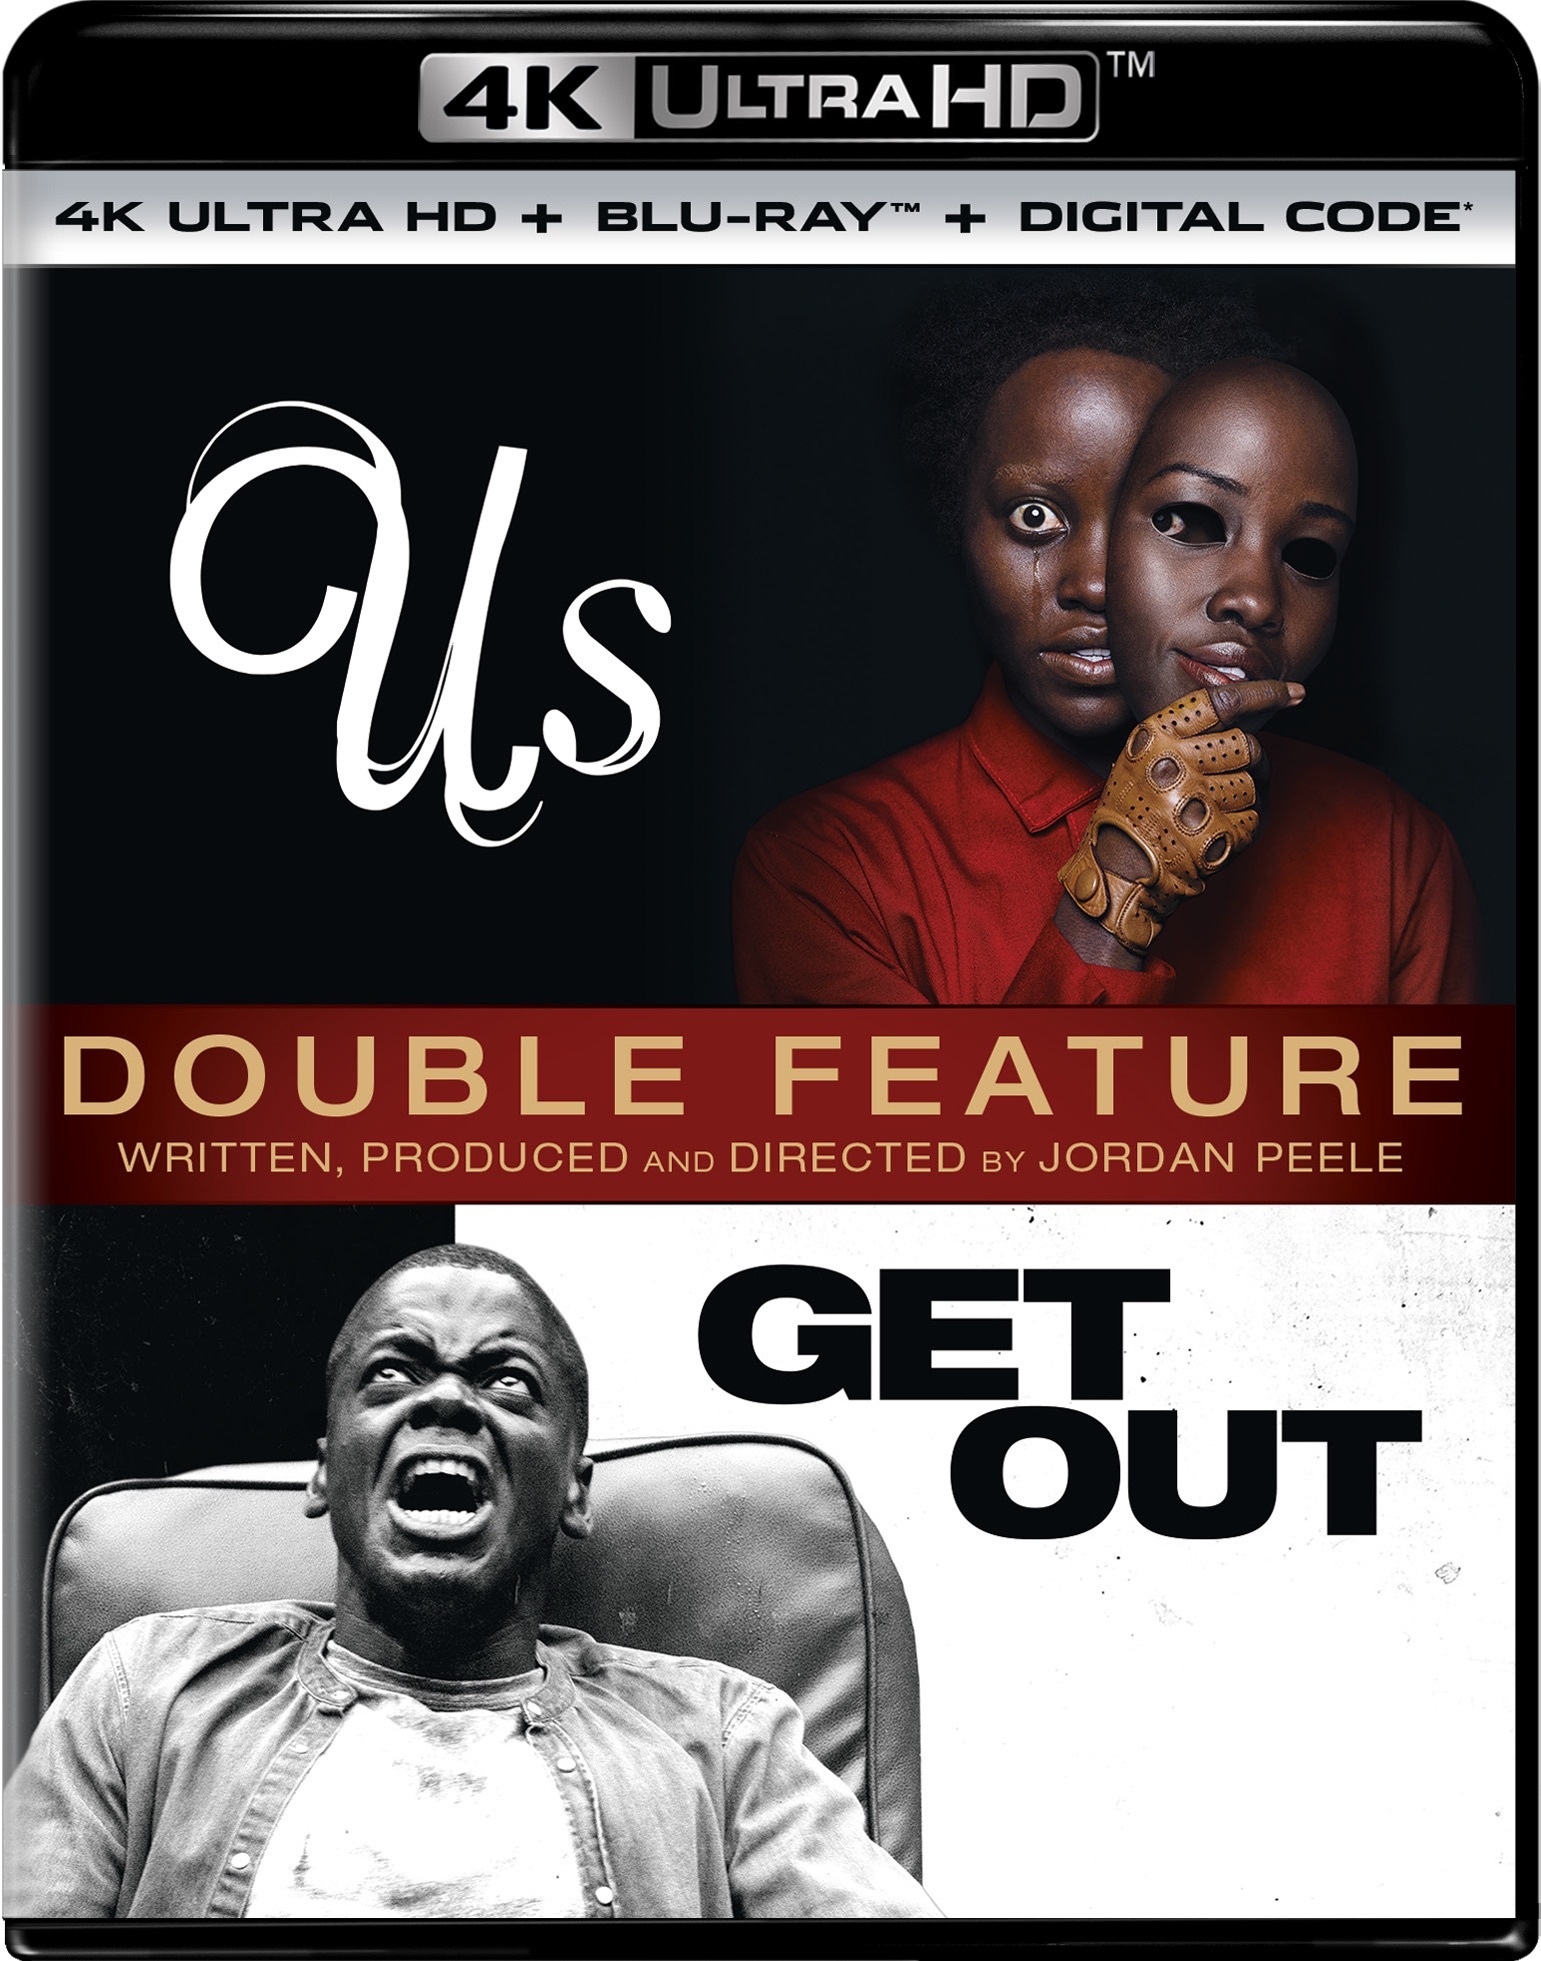 Us / Get Out Double Feature (4K Ultra HD) - UHD [ 2019 ]  - Horror Movies On 4K Ultra HD Blu-ray - Movies On GRUV